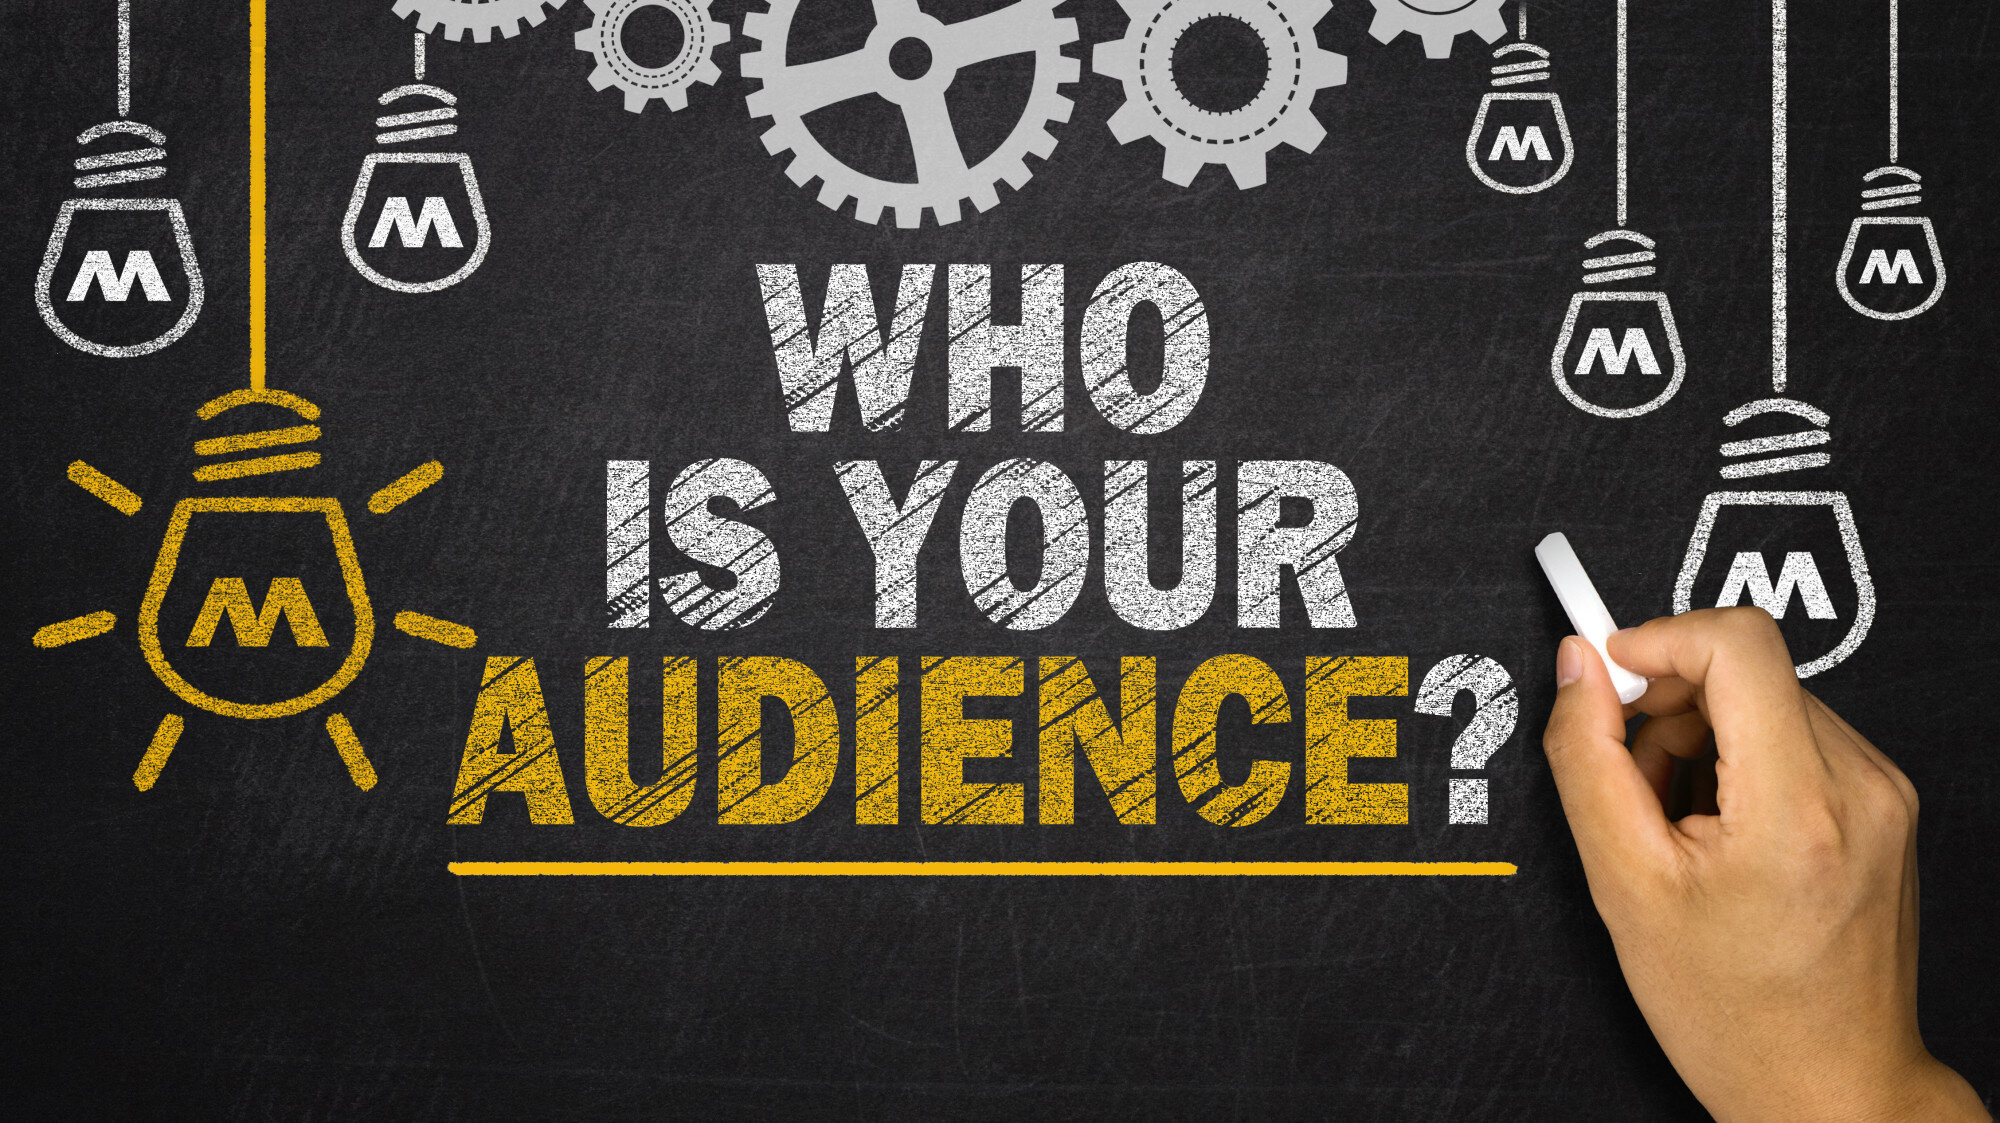 presentations know your audience